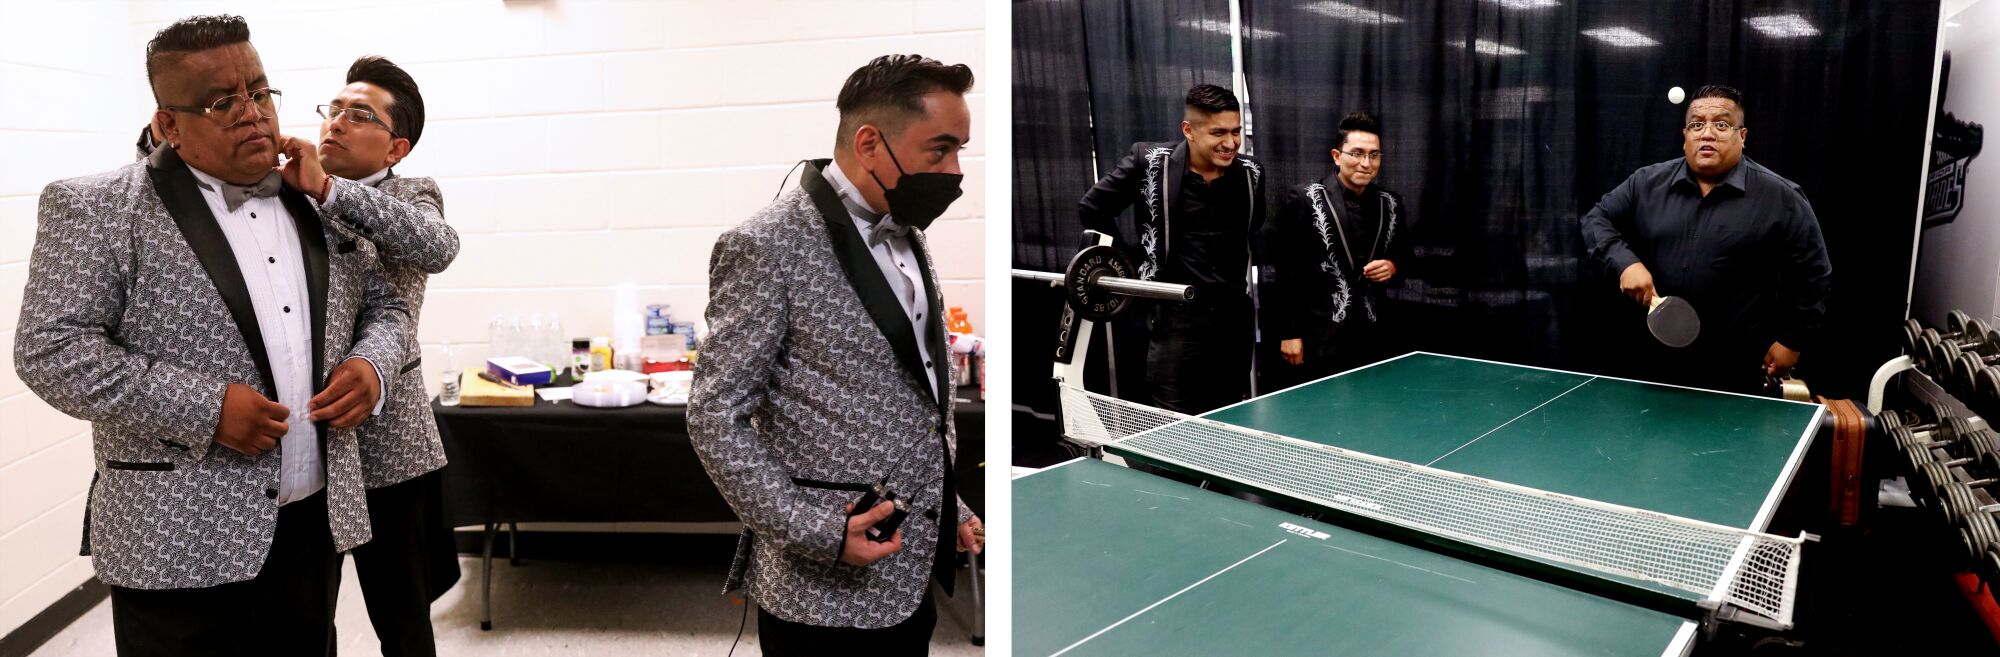 Band members backstage, left, and playing ping pong, right. 